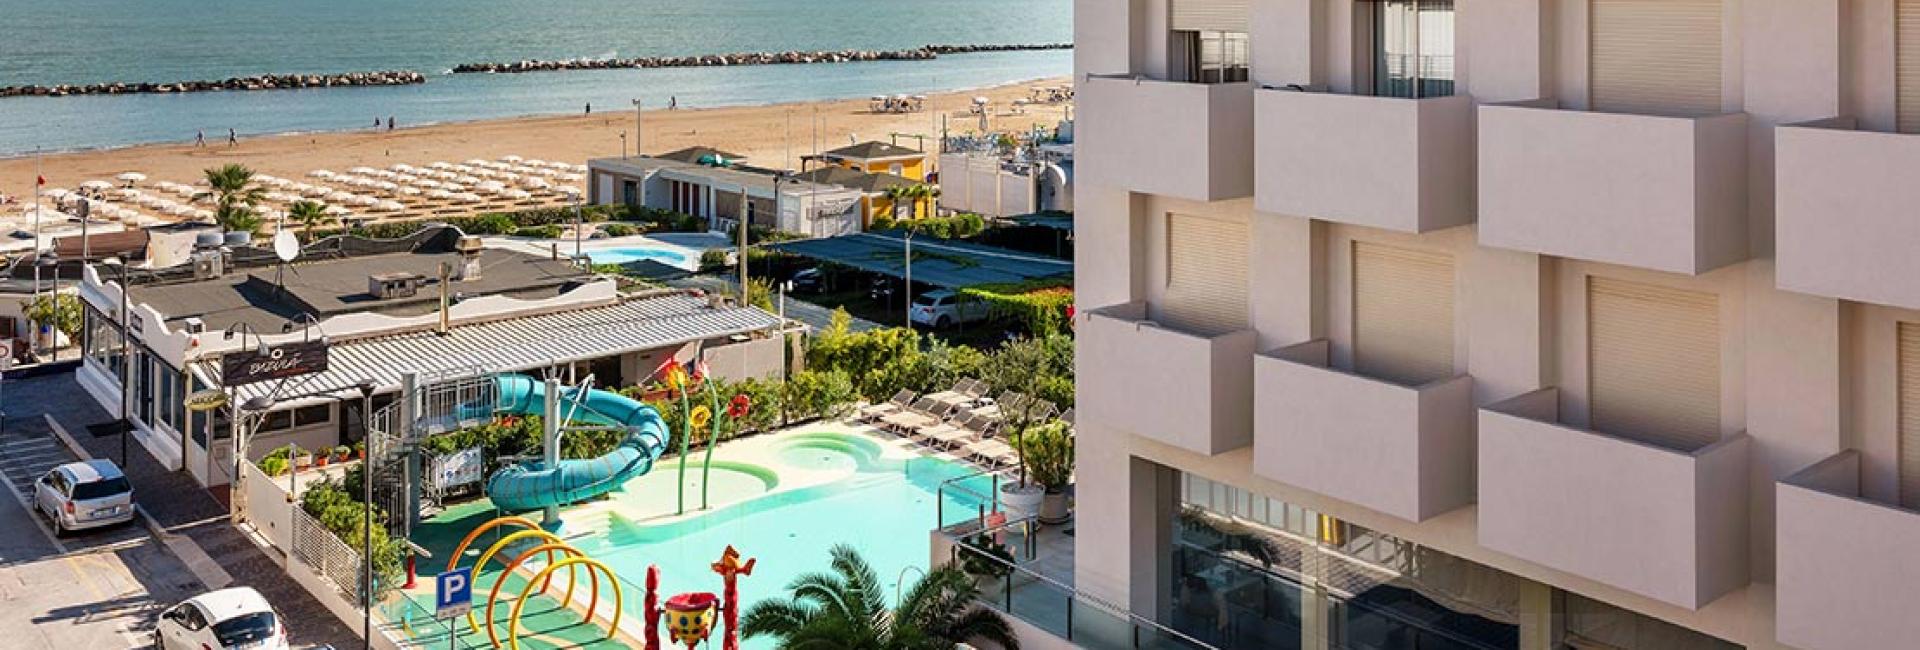 cattolicafamilyresort en late-august-in-cattolica-offer 011